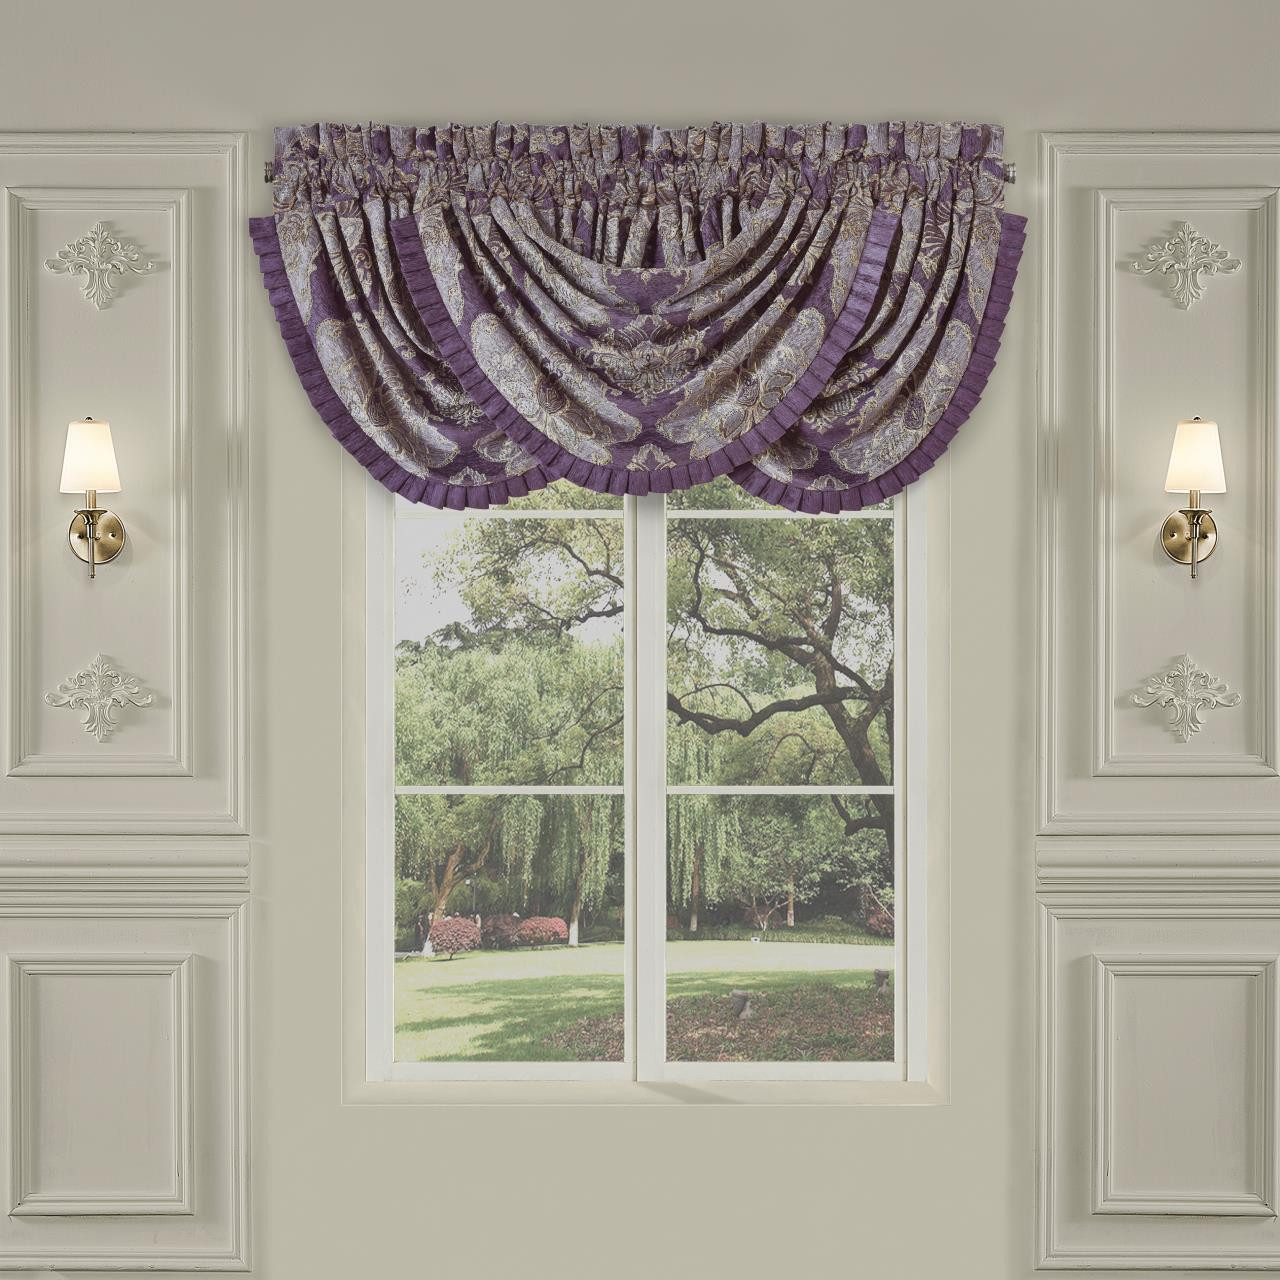 Dominique Lavender Waterfall Valance - 193842126592